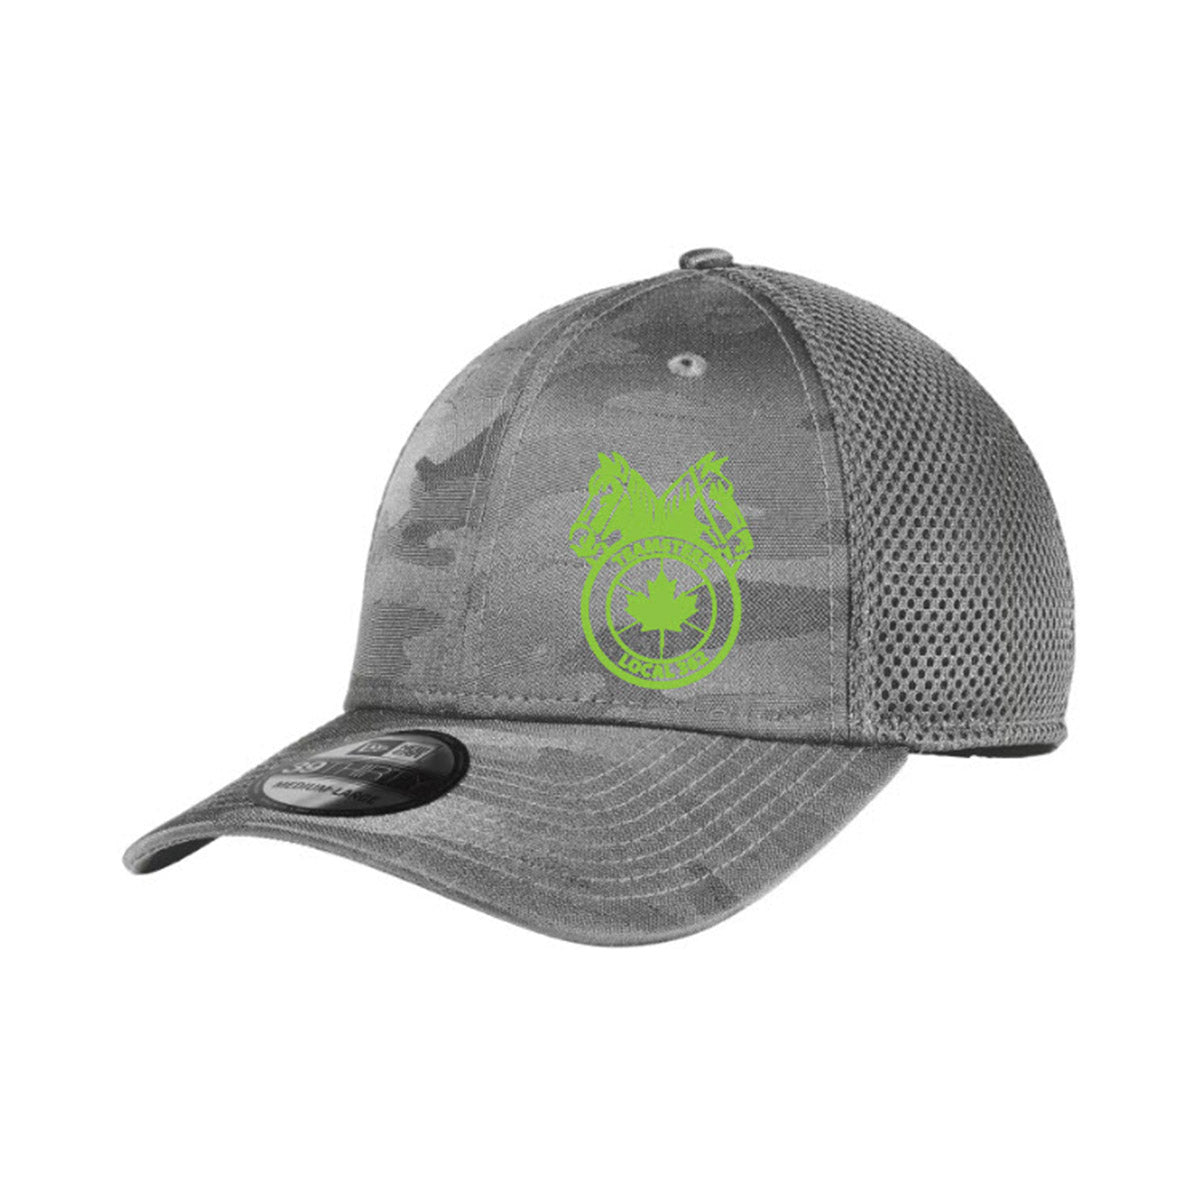 Teamsters 362 - Tonal Camo Cap - LIME GREEN Embroidery